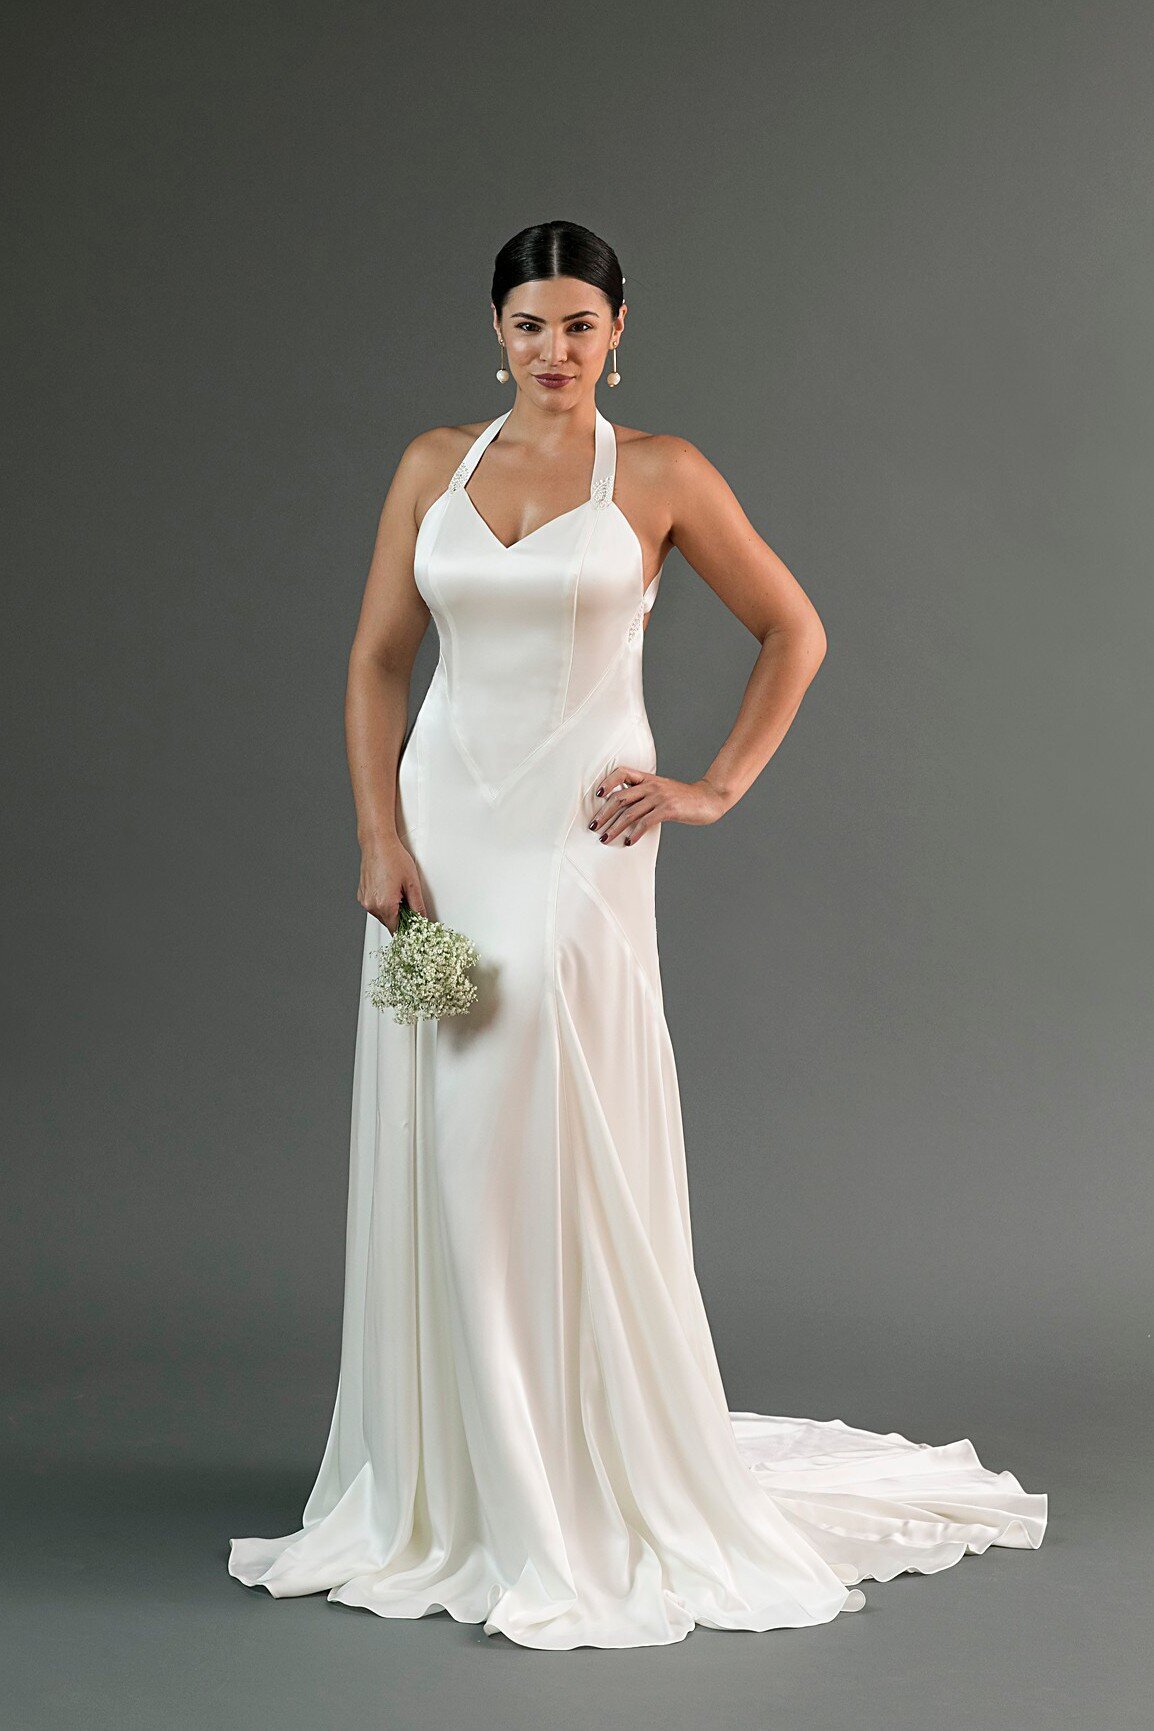 Yuri is a charmeuse wedding dress in a slinky silhouette with a v-neck and intricate seamlines.